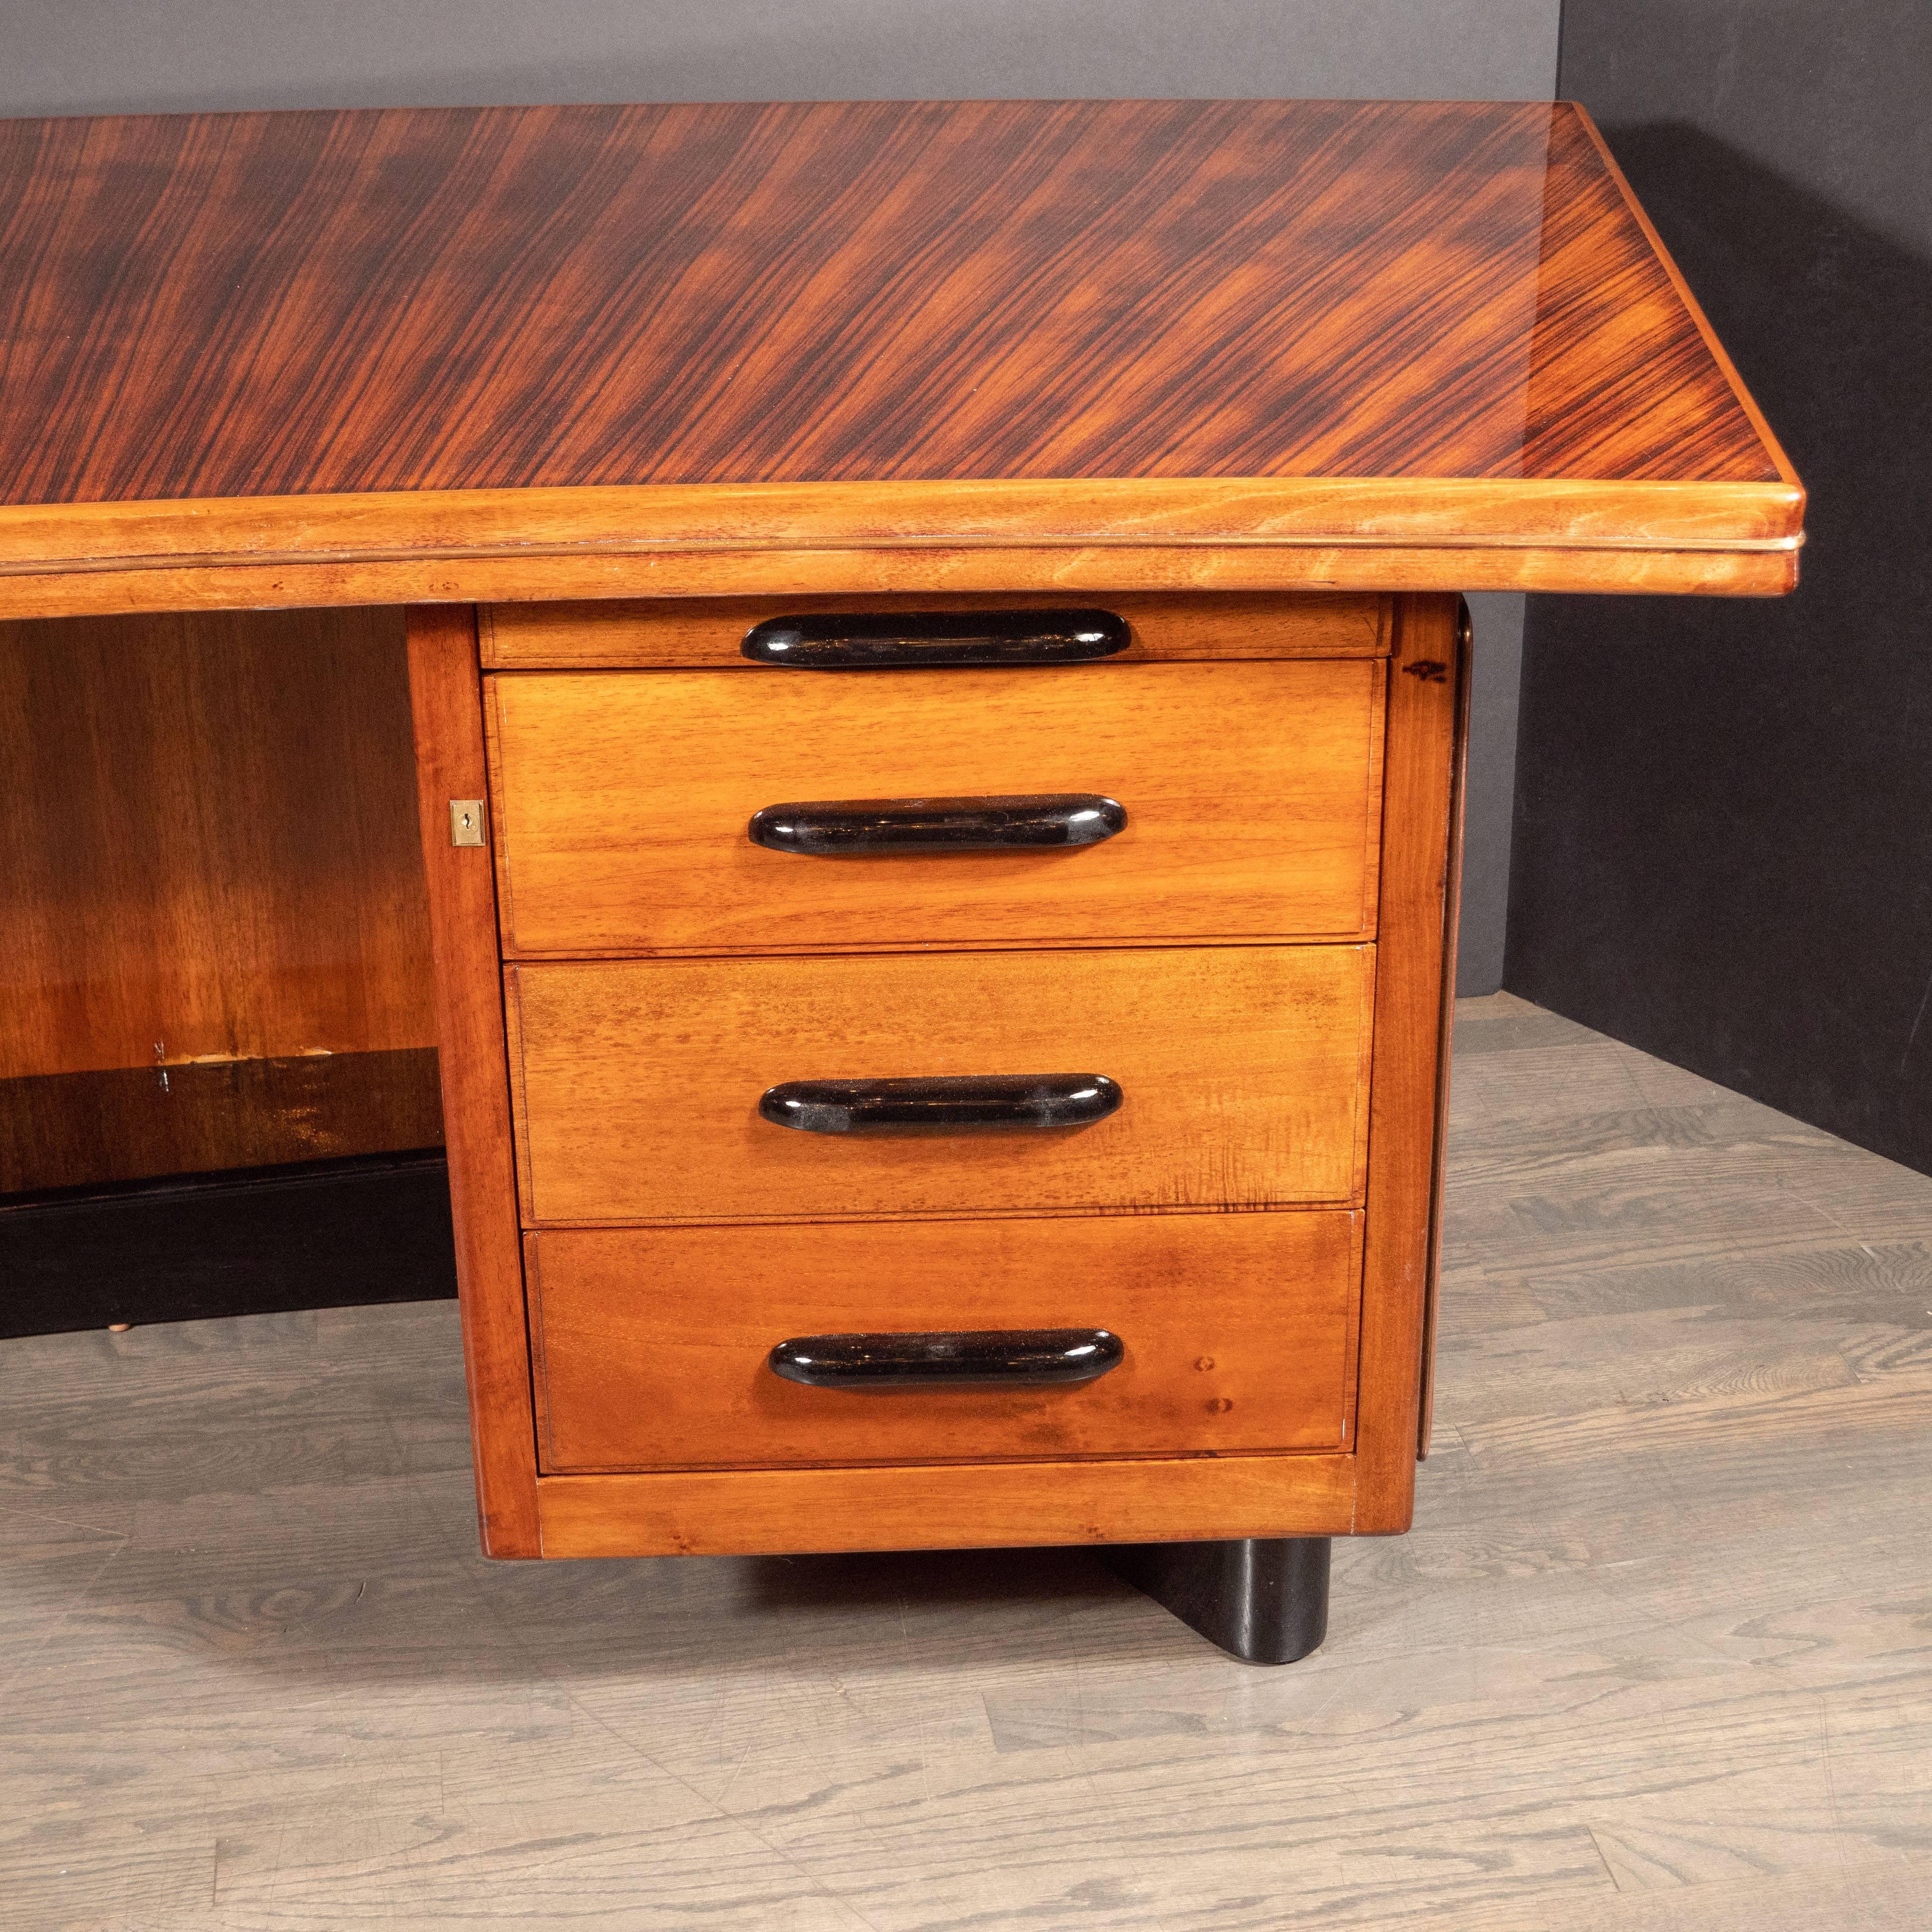 This stunning and elegant desk was realized in the United States, circa 1940. Composed of a classic streamlined bow front form, the top, sides and back of the piece has been created in bookmatched rosewood offering a dramatic grain. The interior of